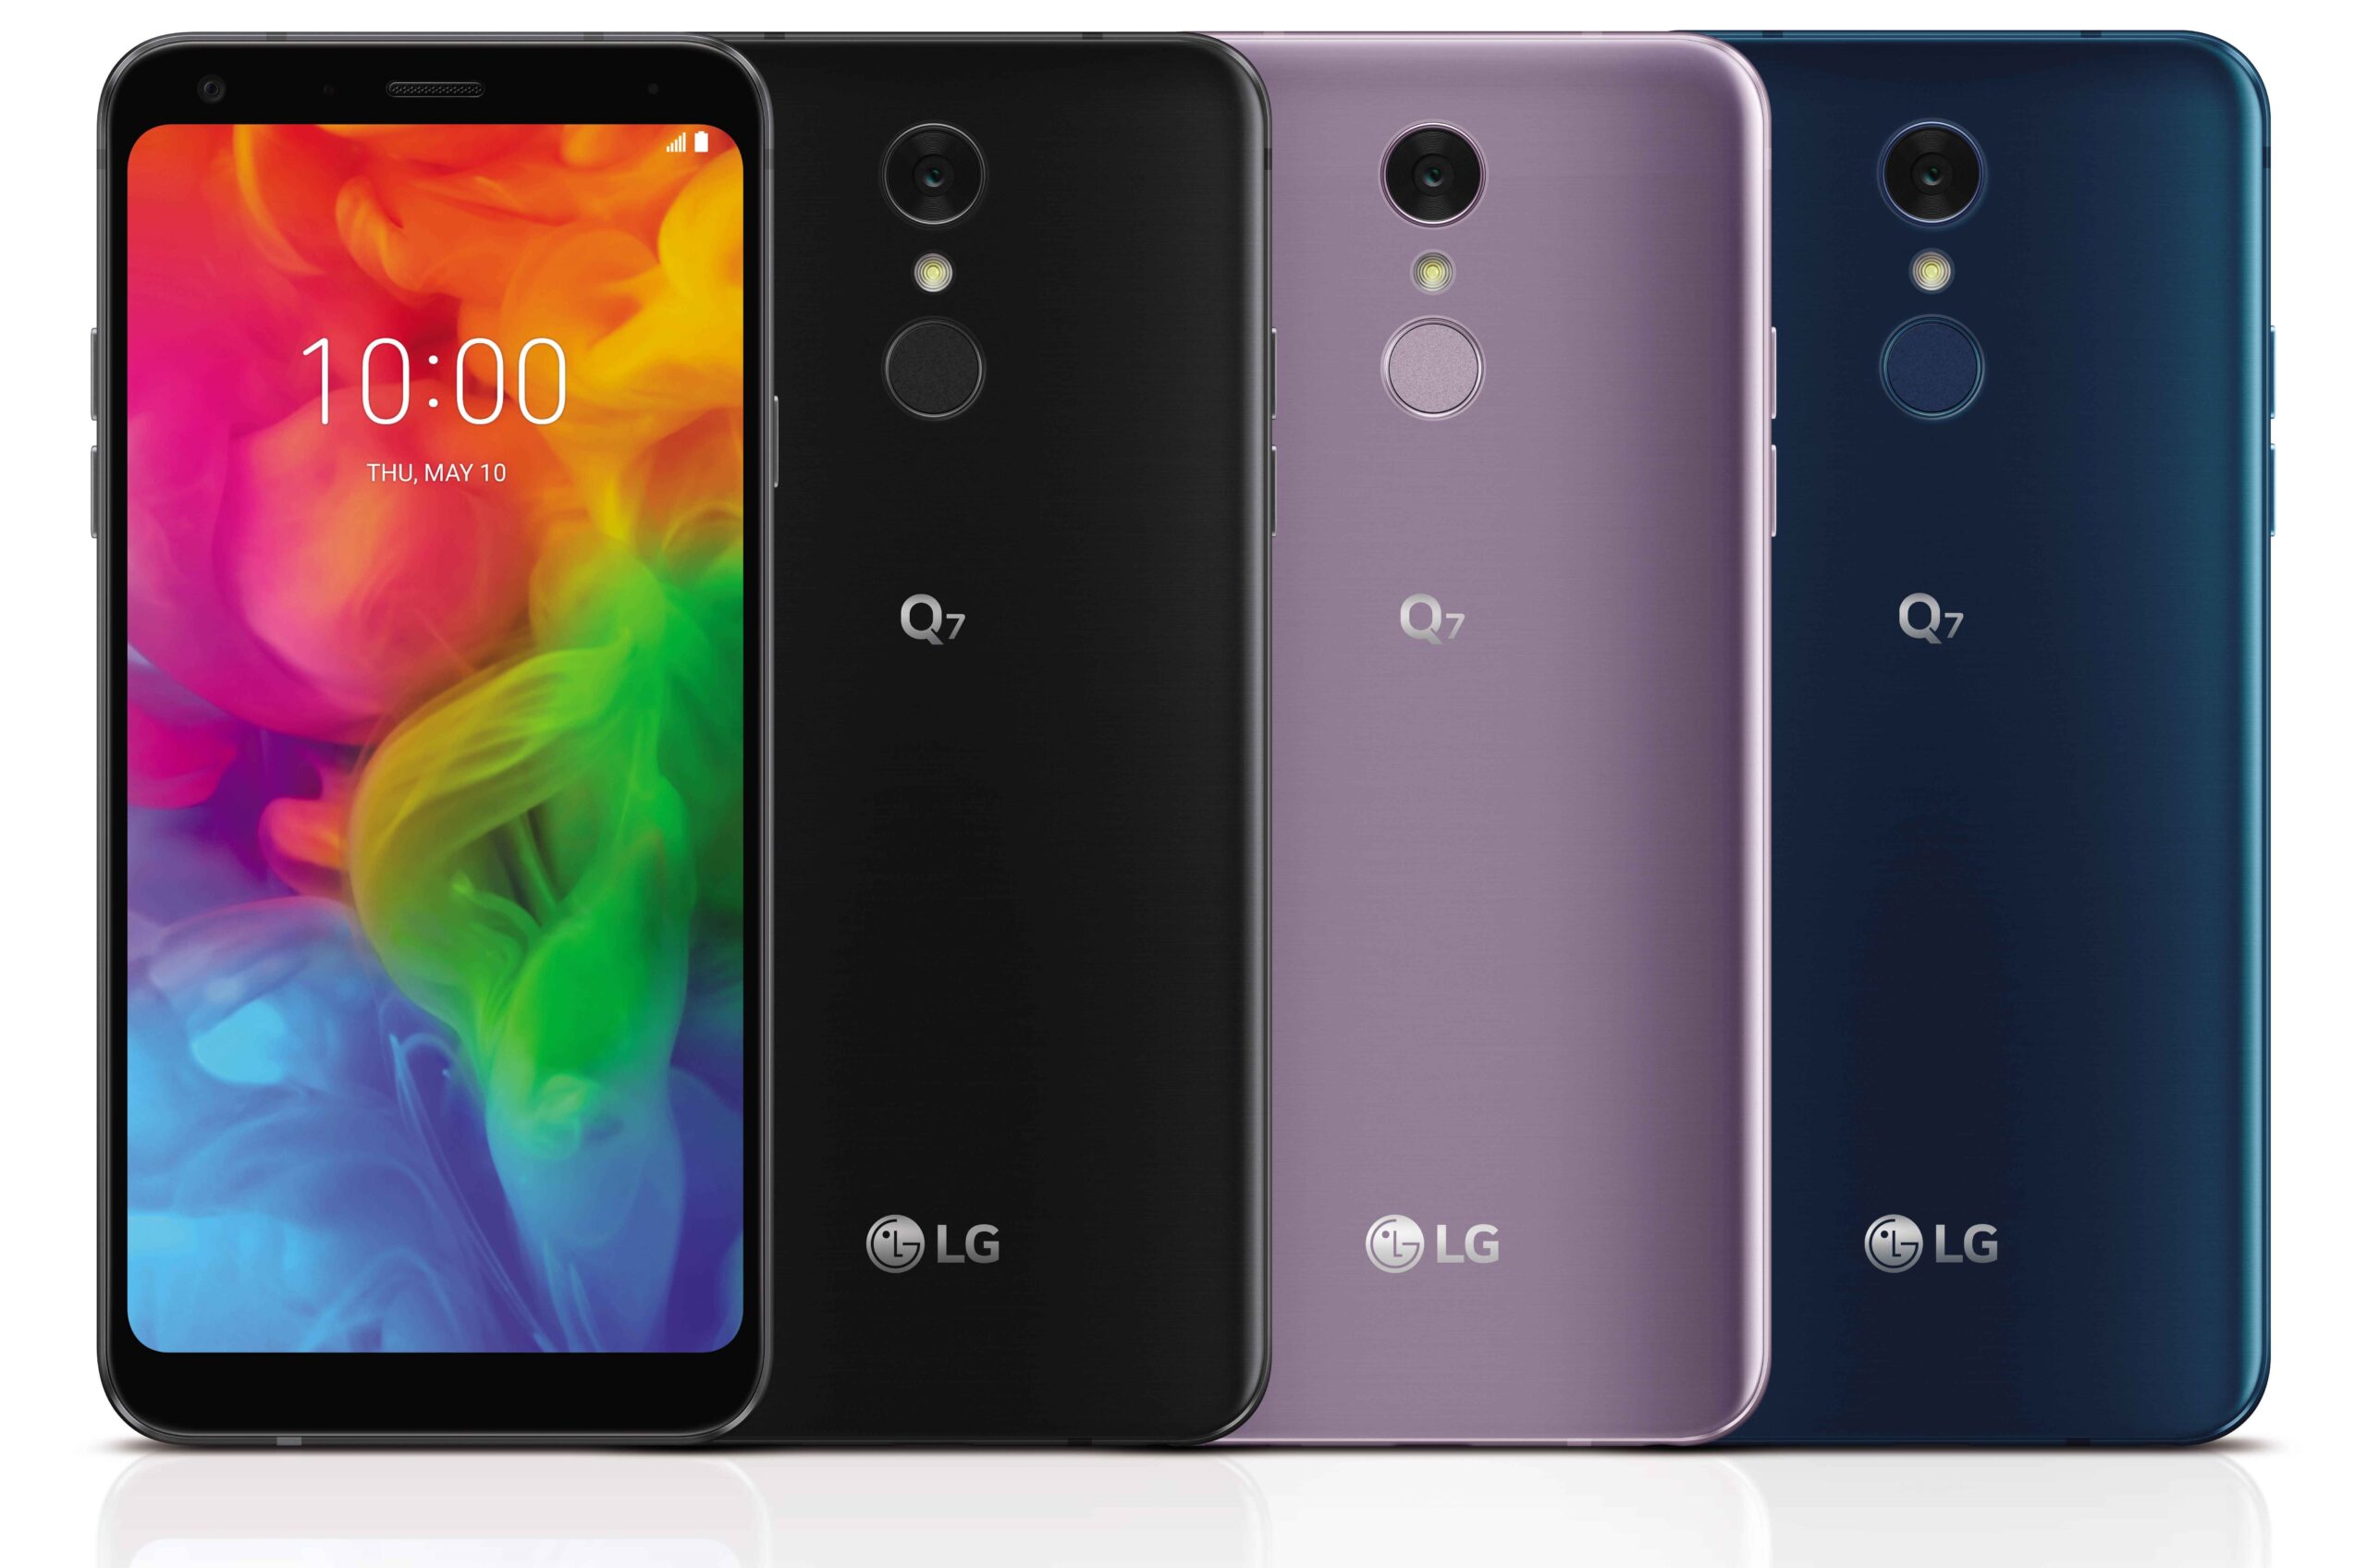 The front and rear view of the LG Q7 in Aurora Black, Moroccan Blue and Lavender Violet, side-by-side